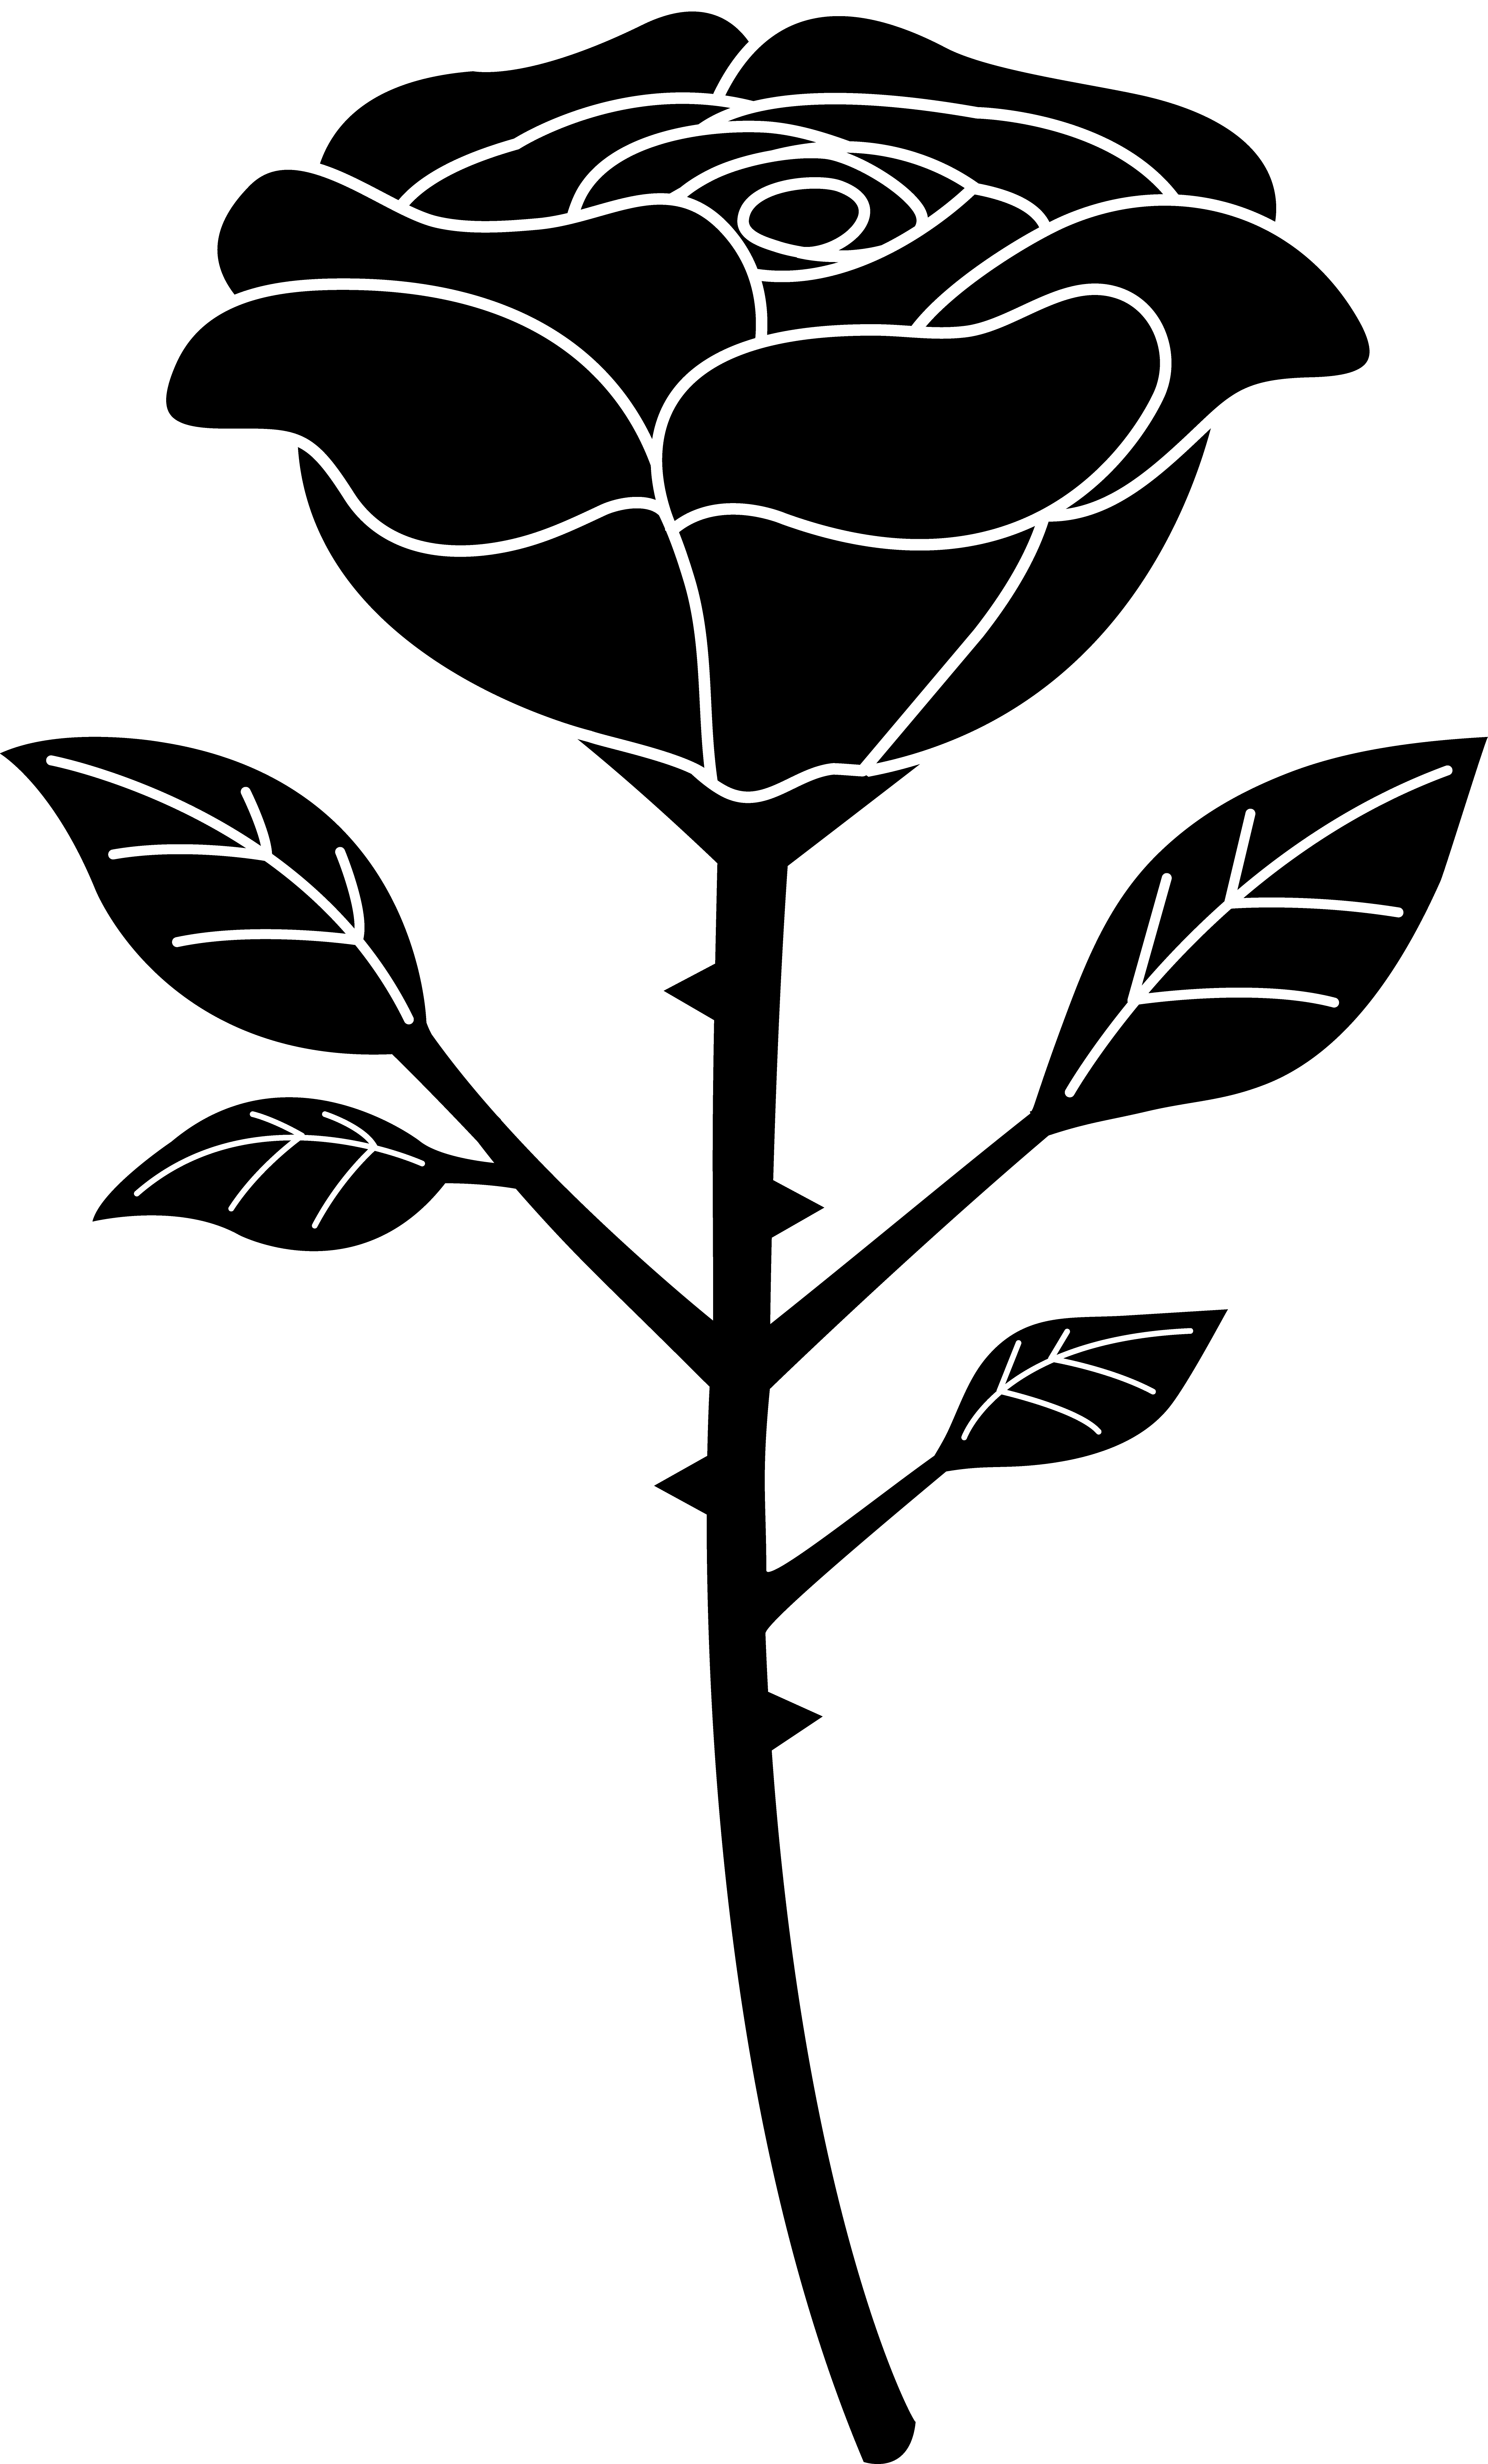 free-rose-black-and-white-outline-download-free-rose-black-and-white